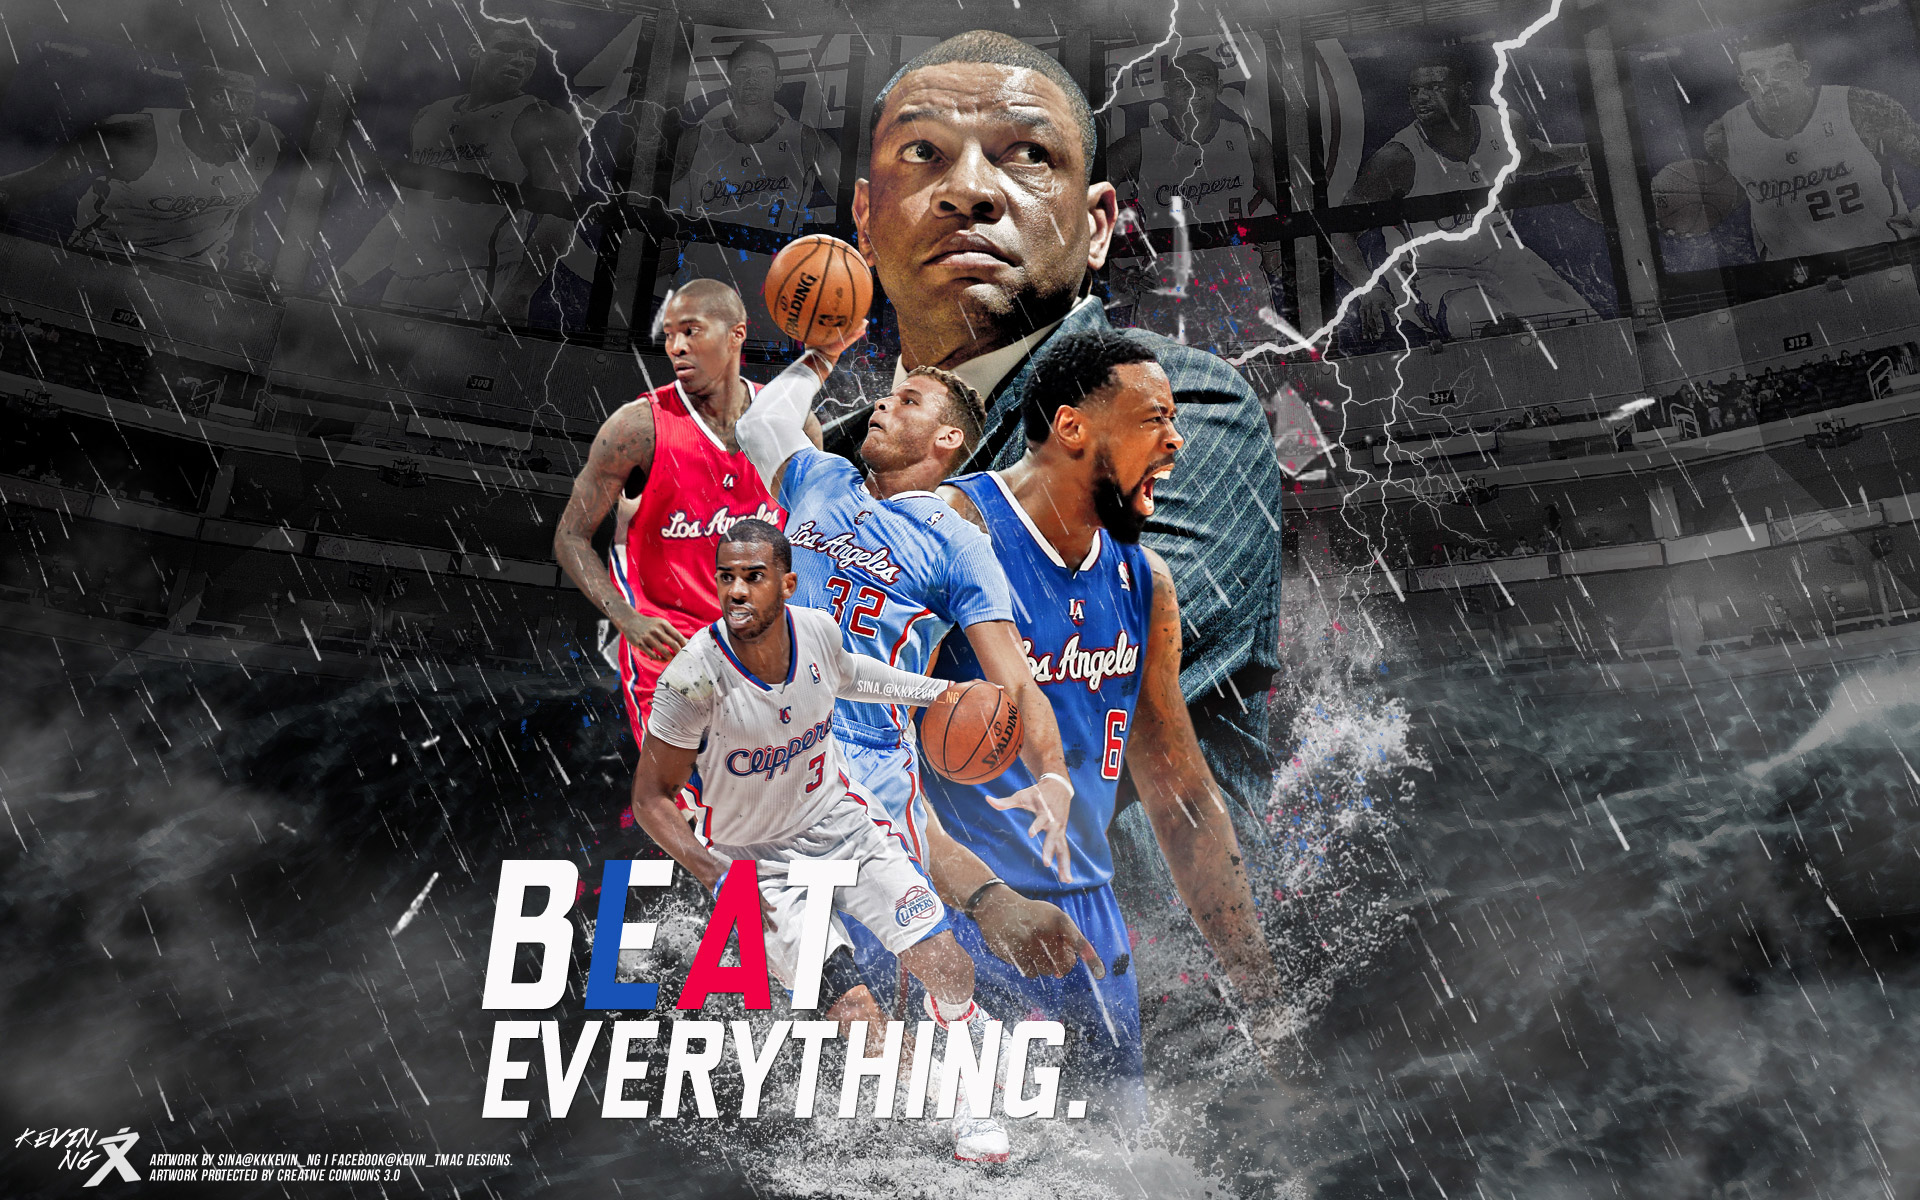 Next Is Another Wallpaper For Clippers Fans A New Widescreen